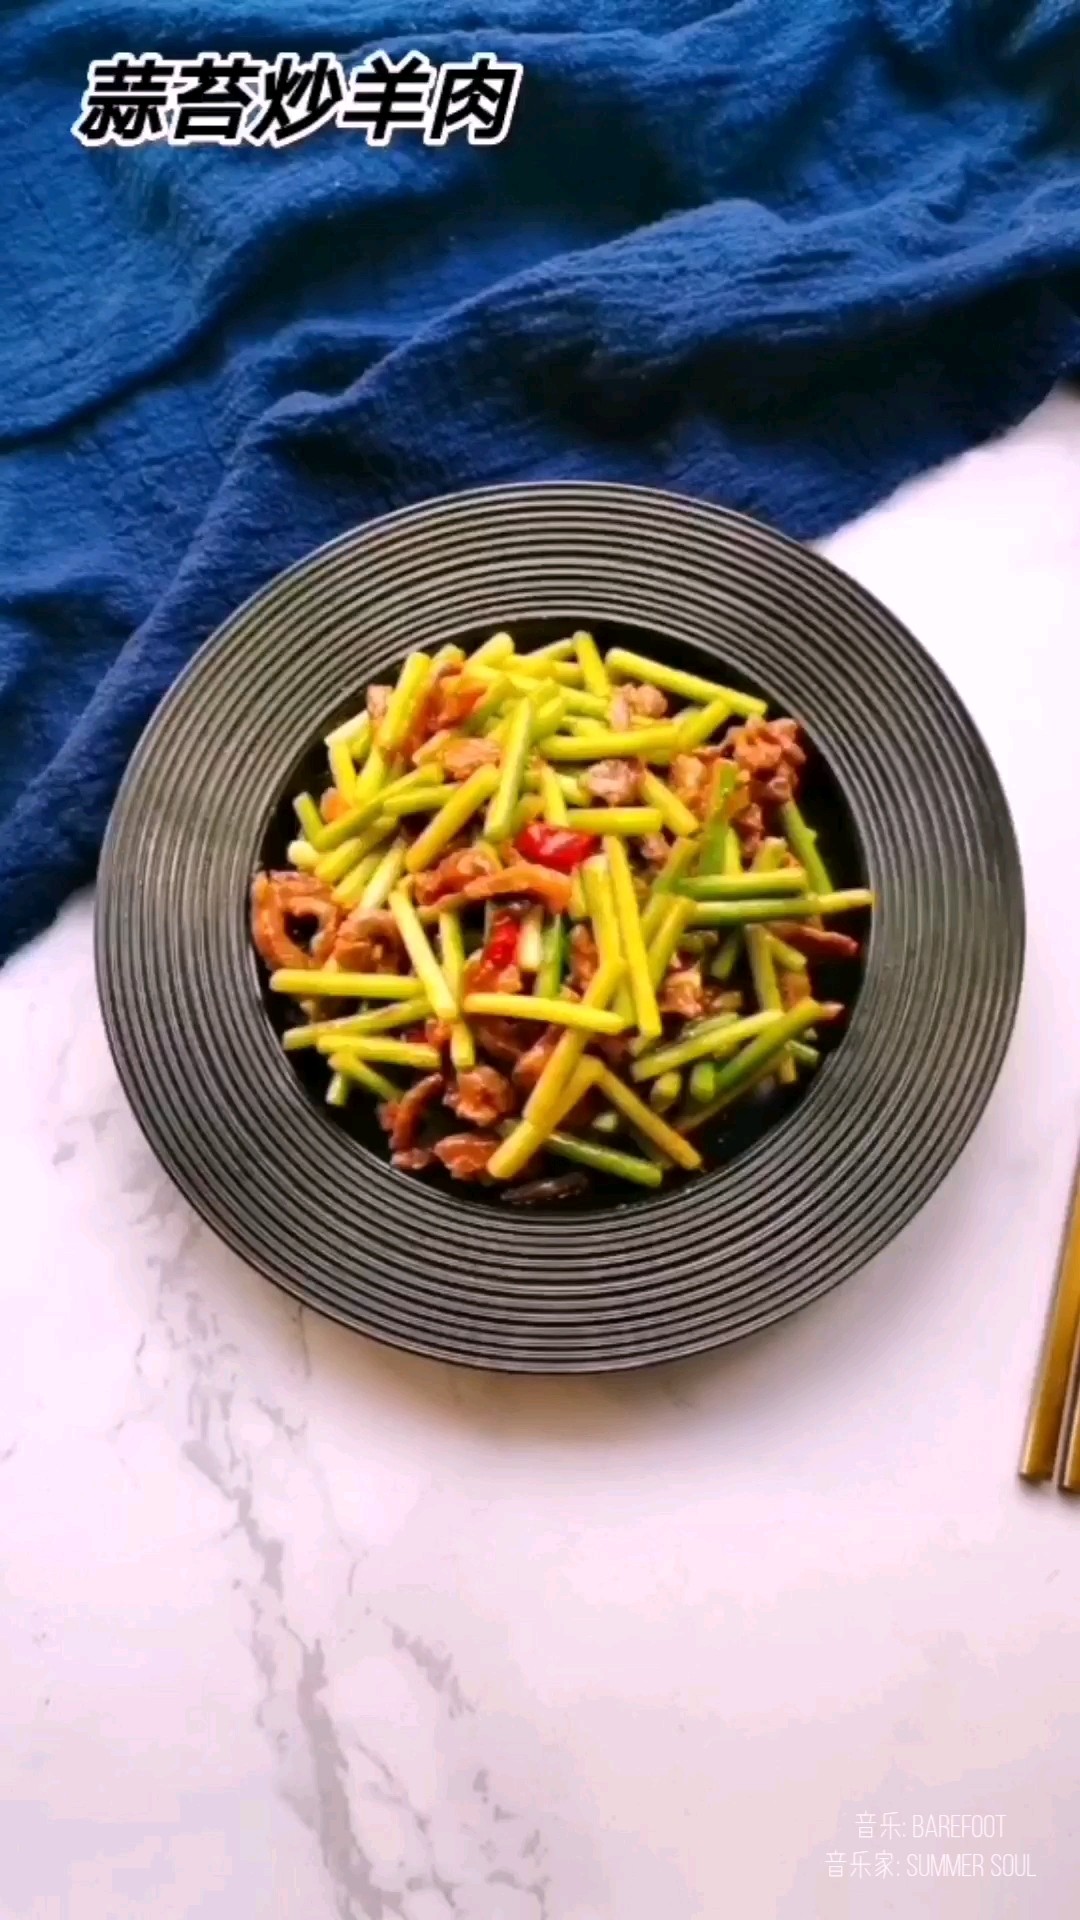 The Most Suitable Quick-hand Stir-fry in Winter, Warming Up and Eating~ recipe